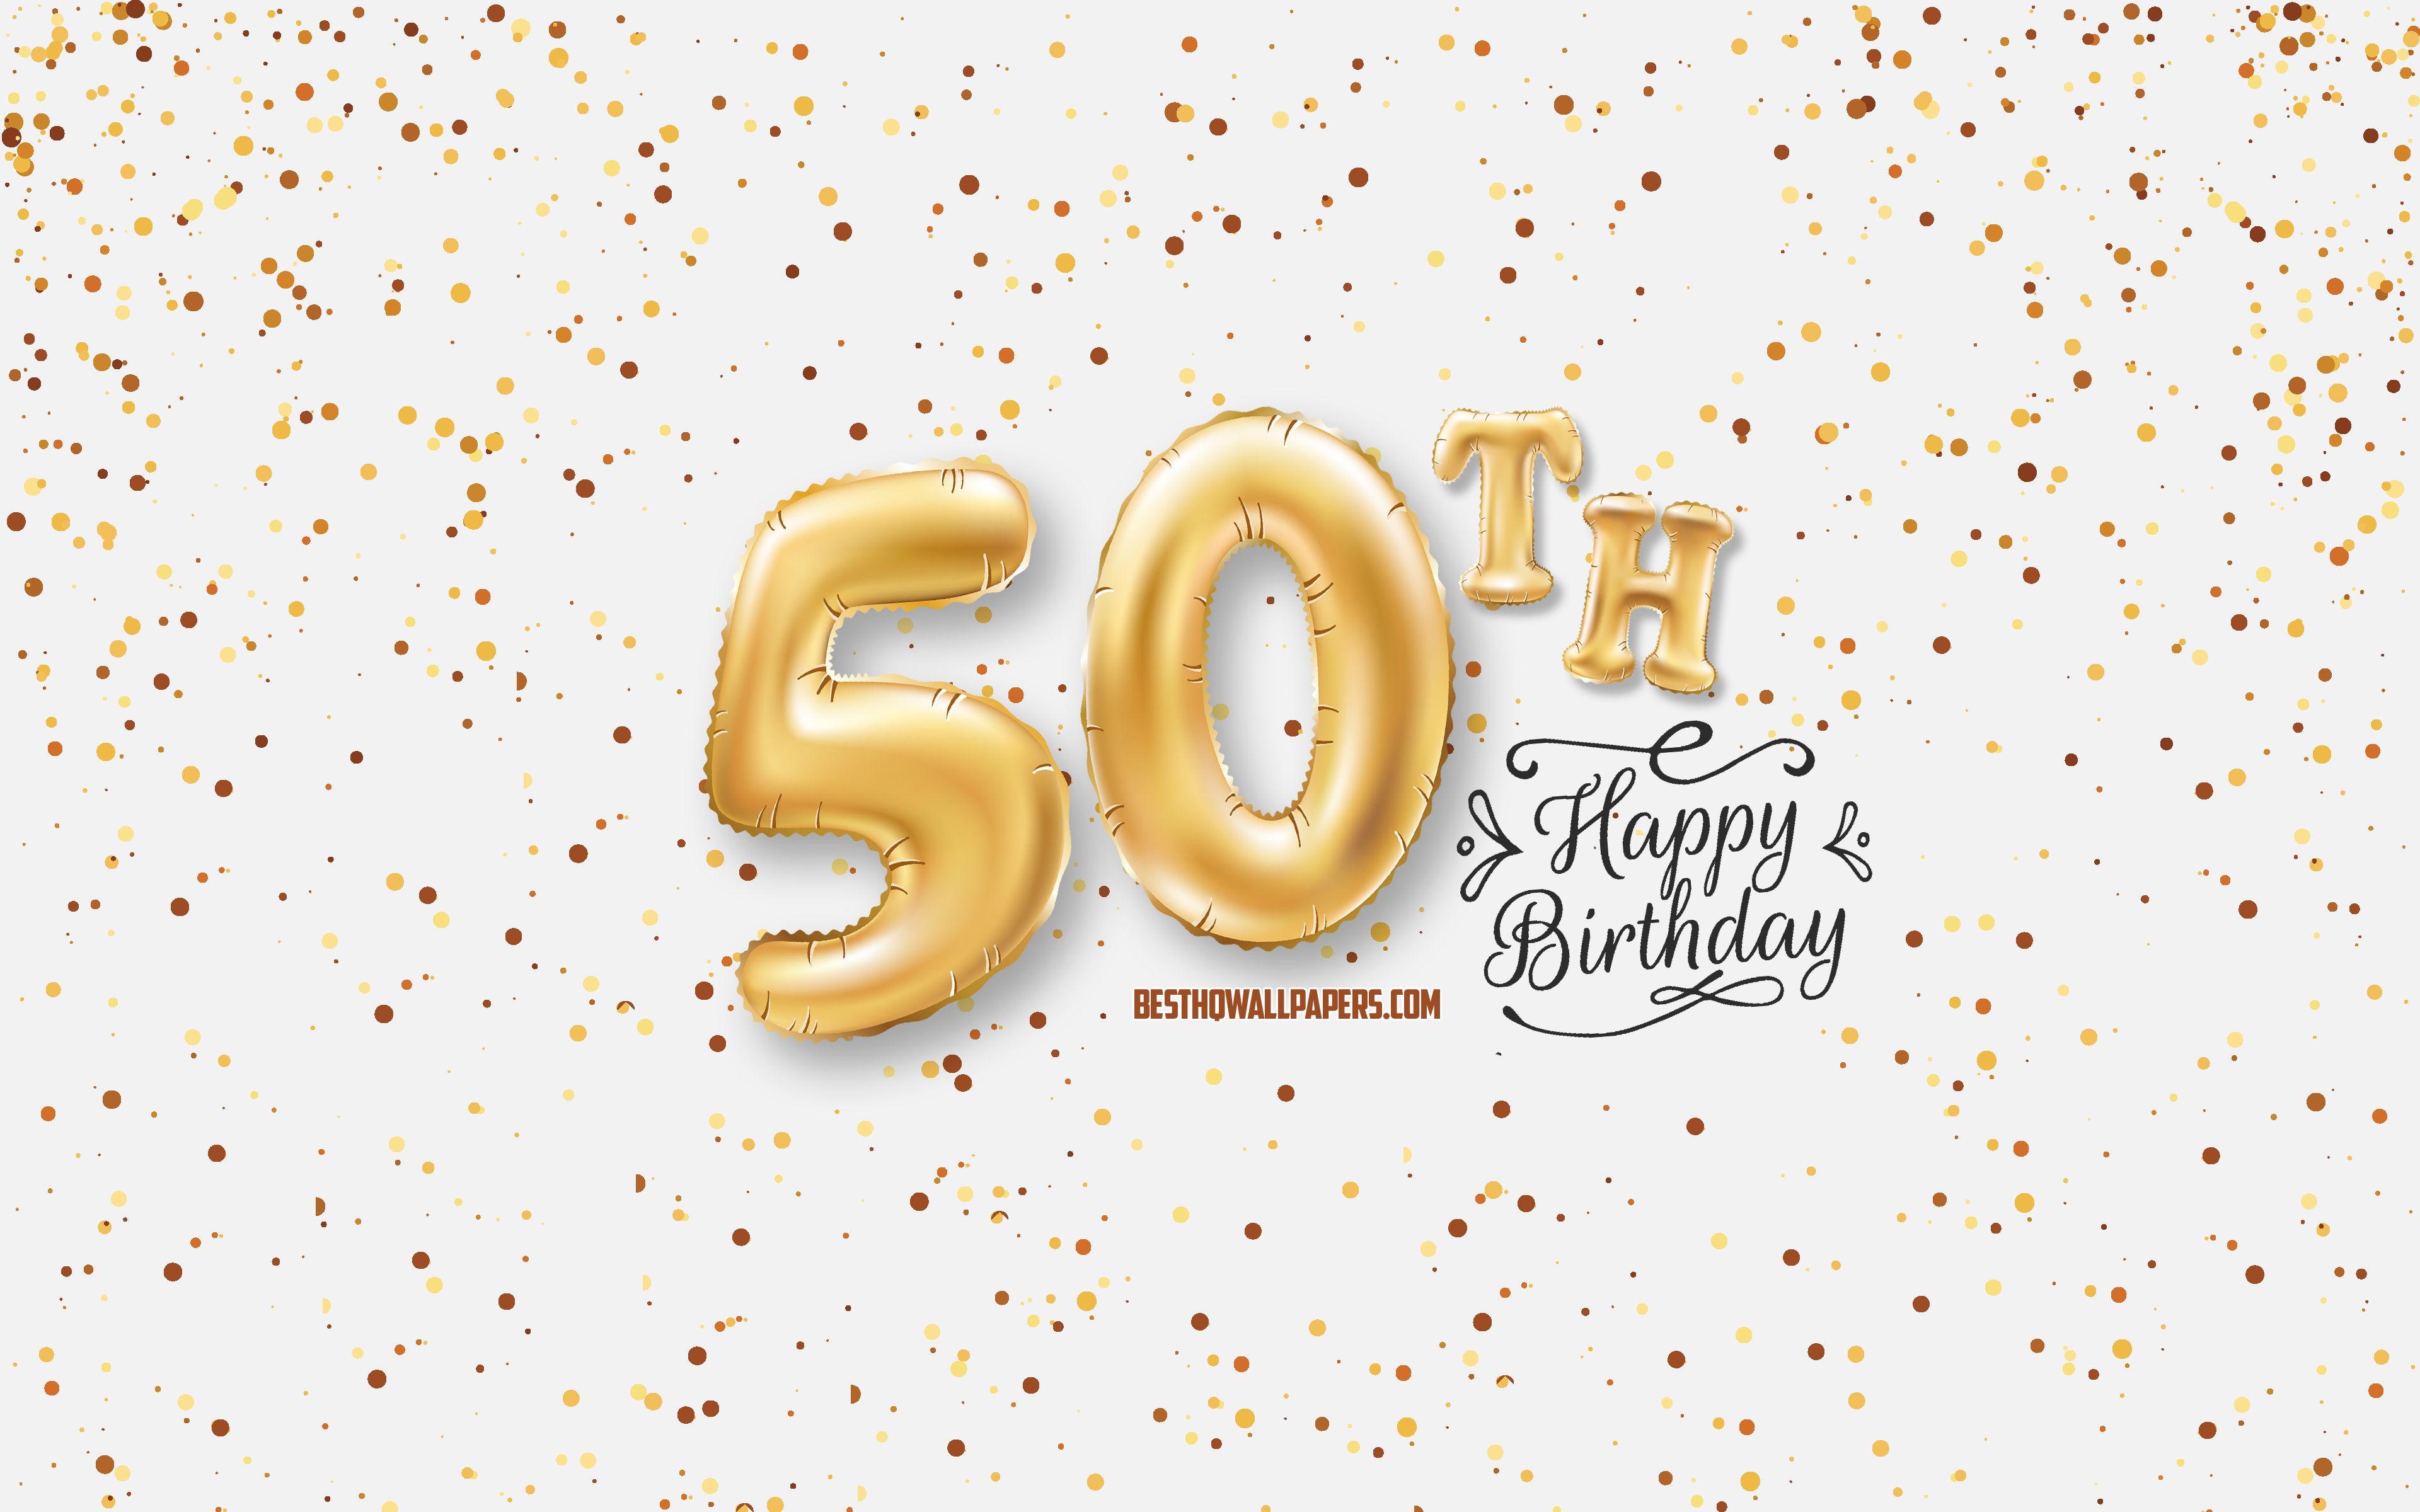 Download wallpaper 50th Happy Birthday, 3D balloons letters, Birthday background with balloons, 50 Years Birthday, Happy 50th Birthday, white background, Happy Birthday, greeting card, Happy 50 Years Birthday for desktop with resolution